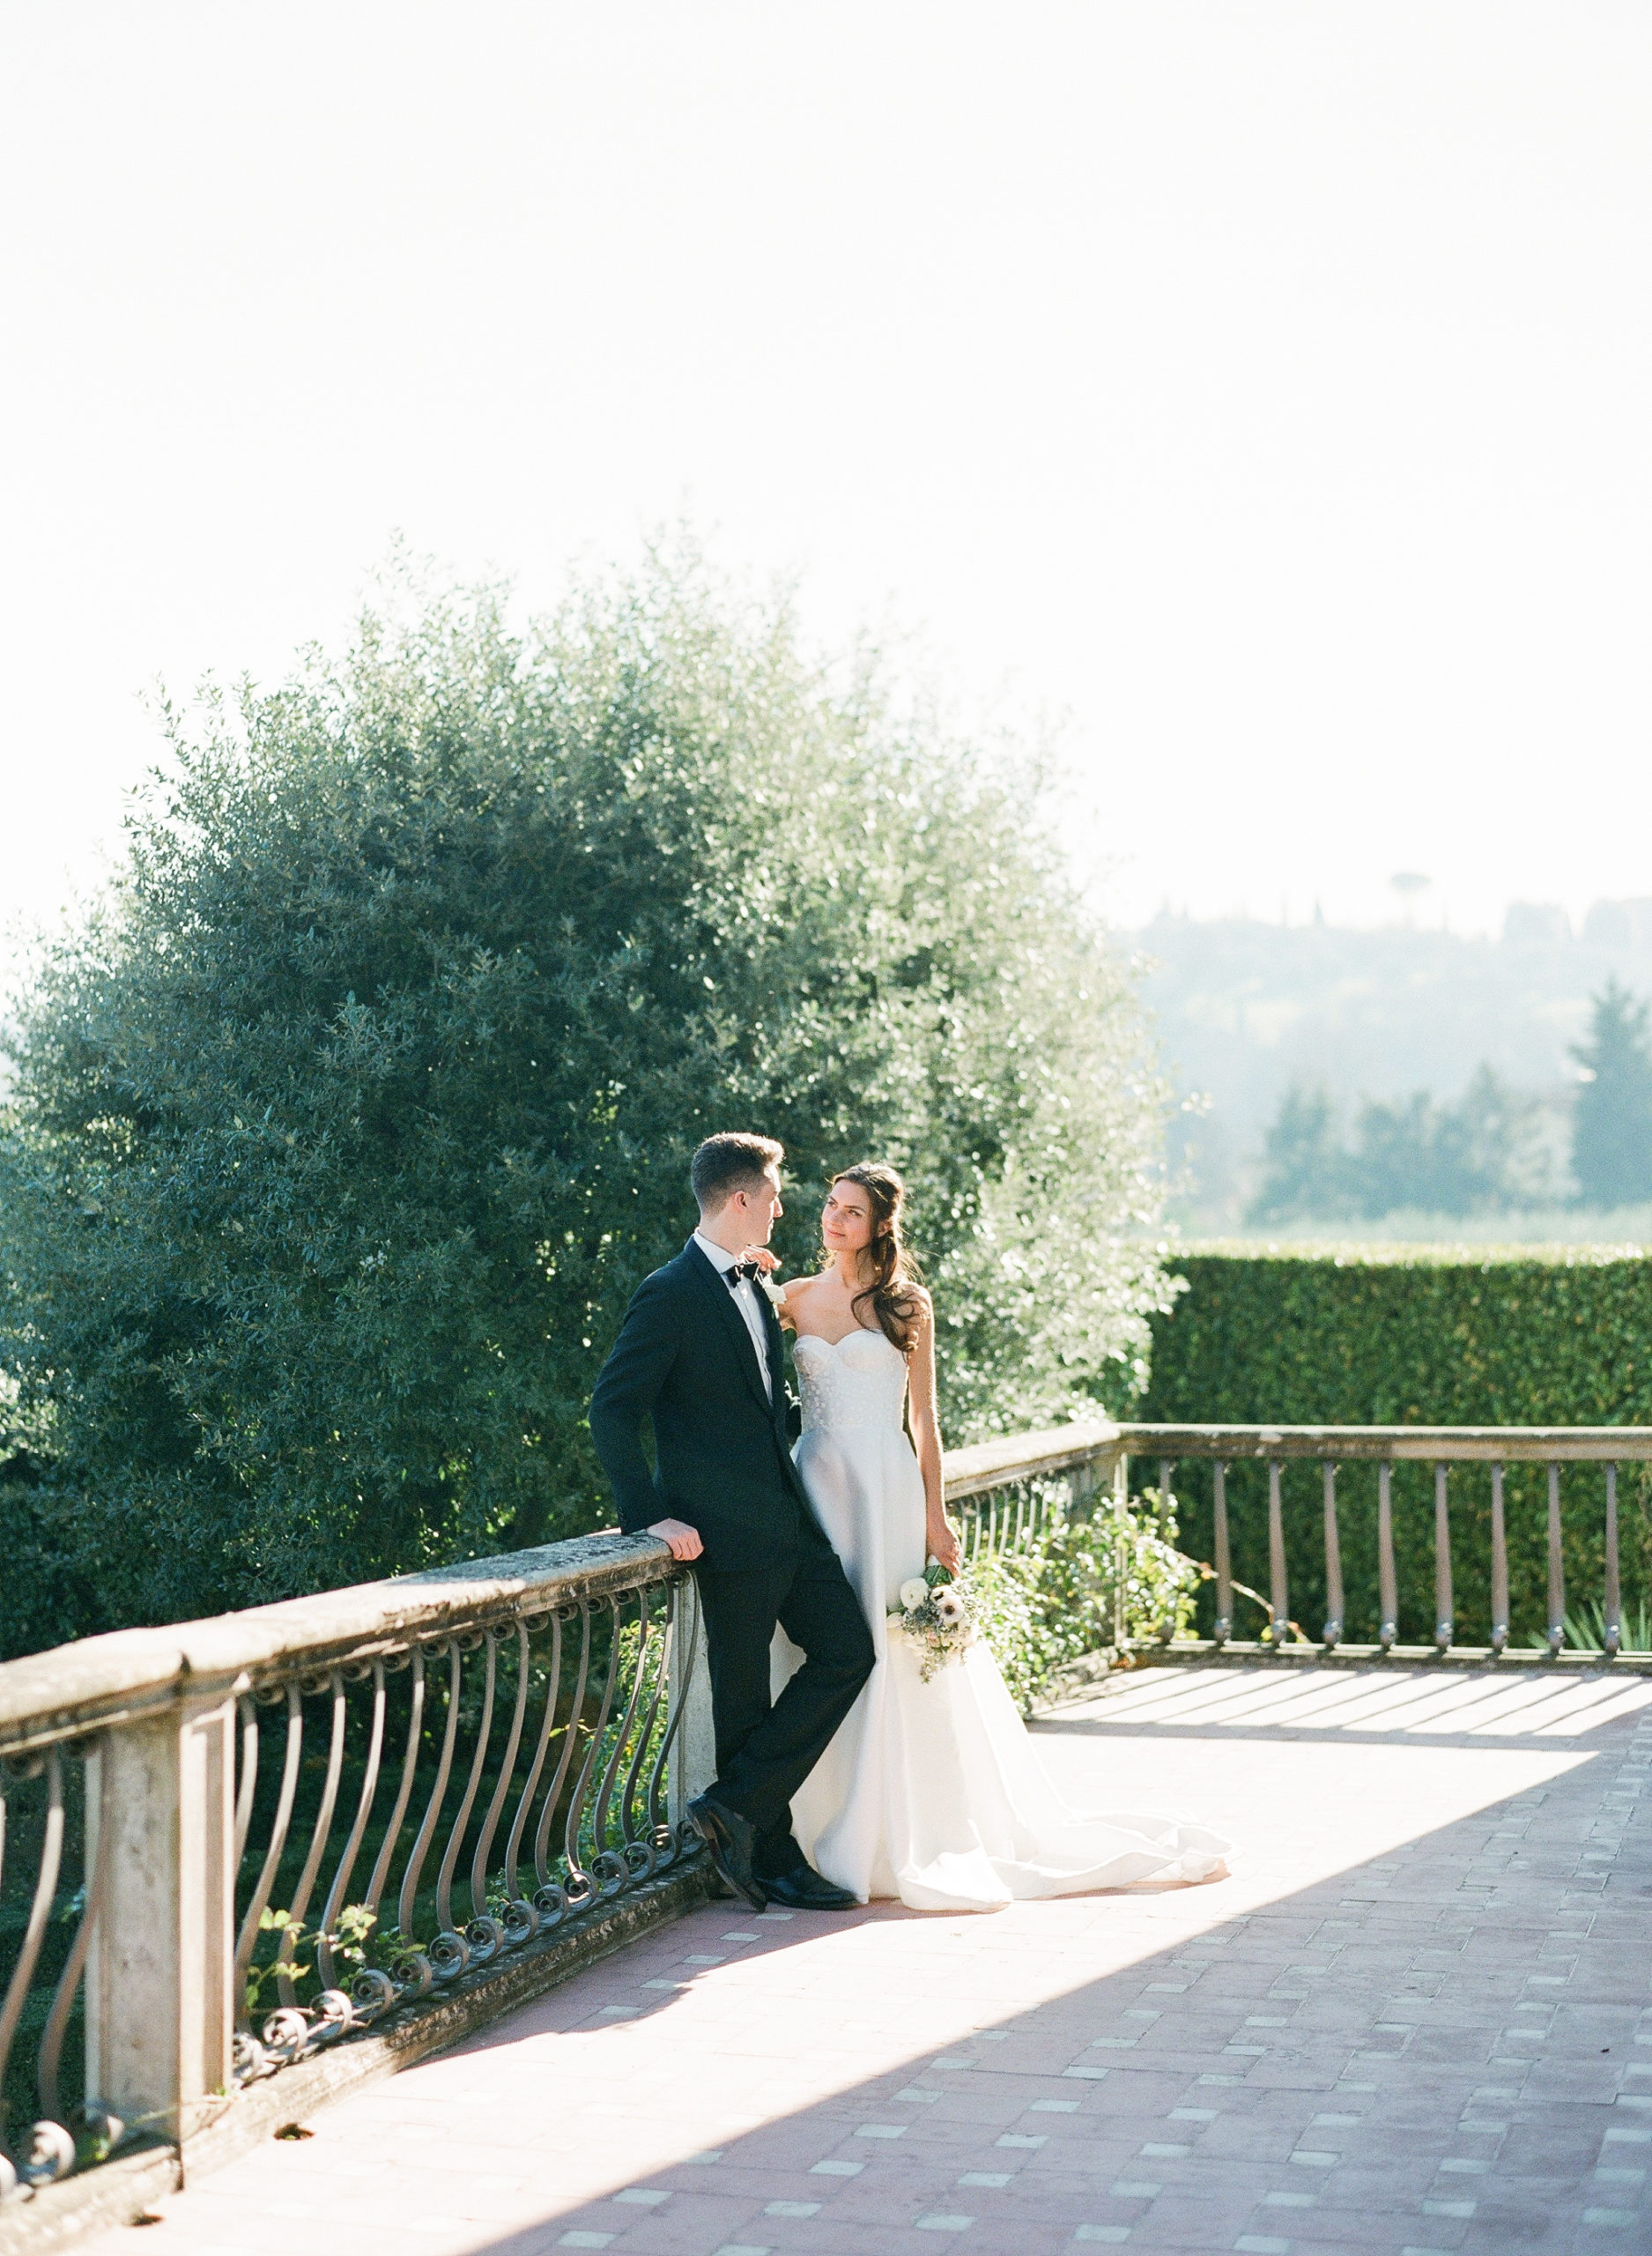 Married in florence